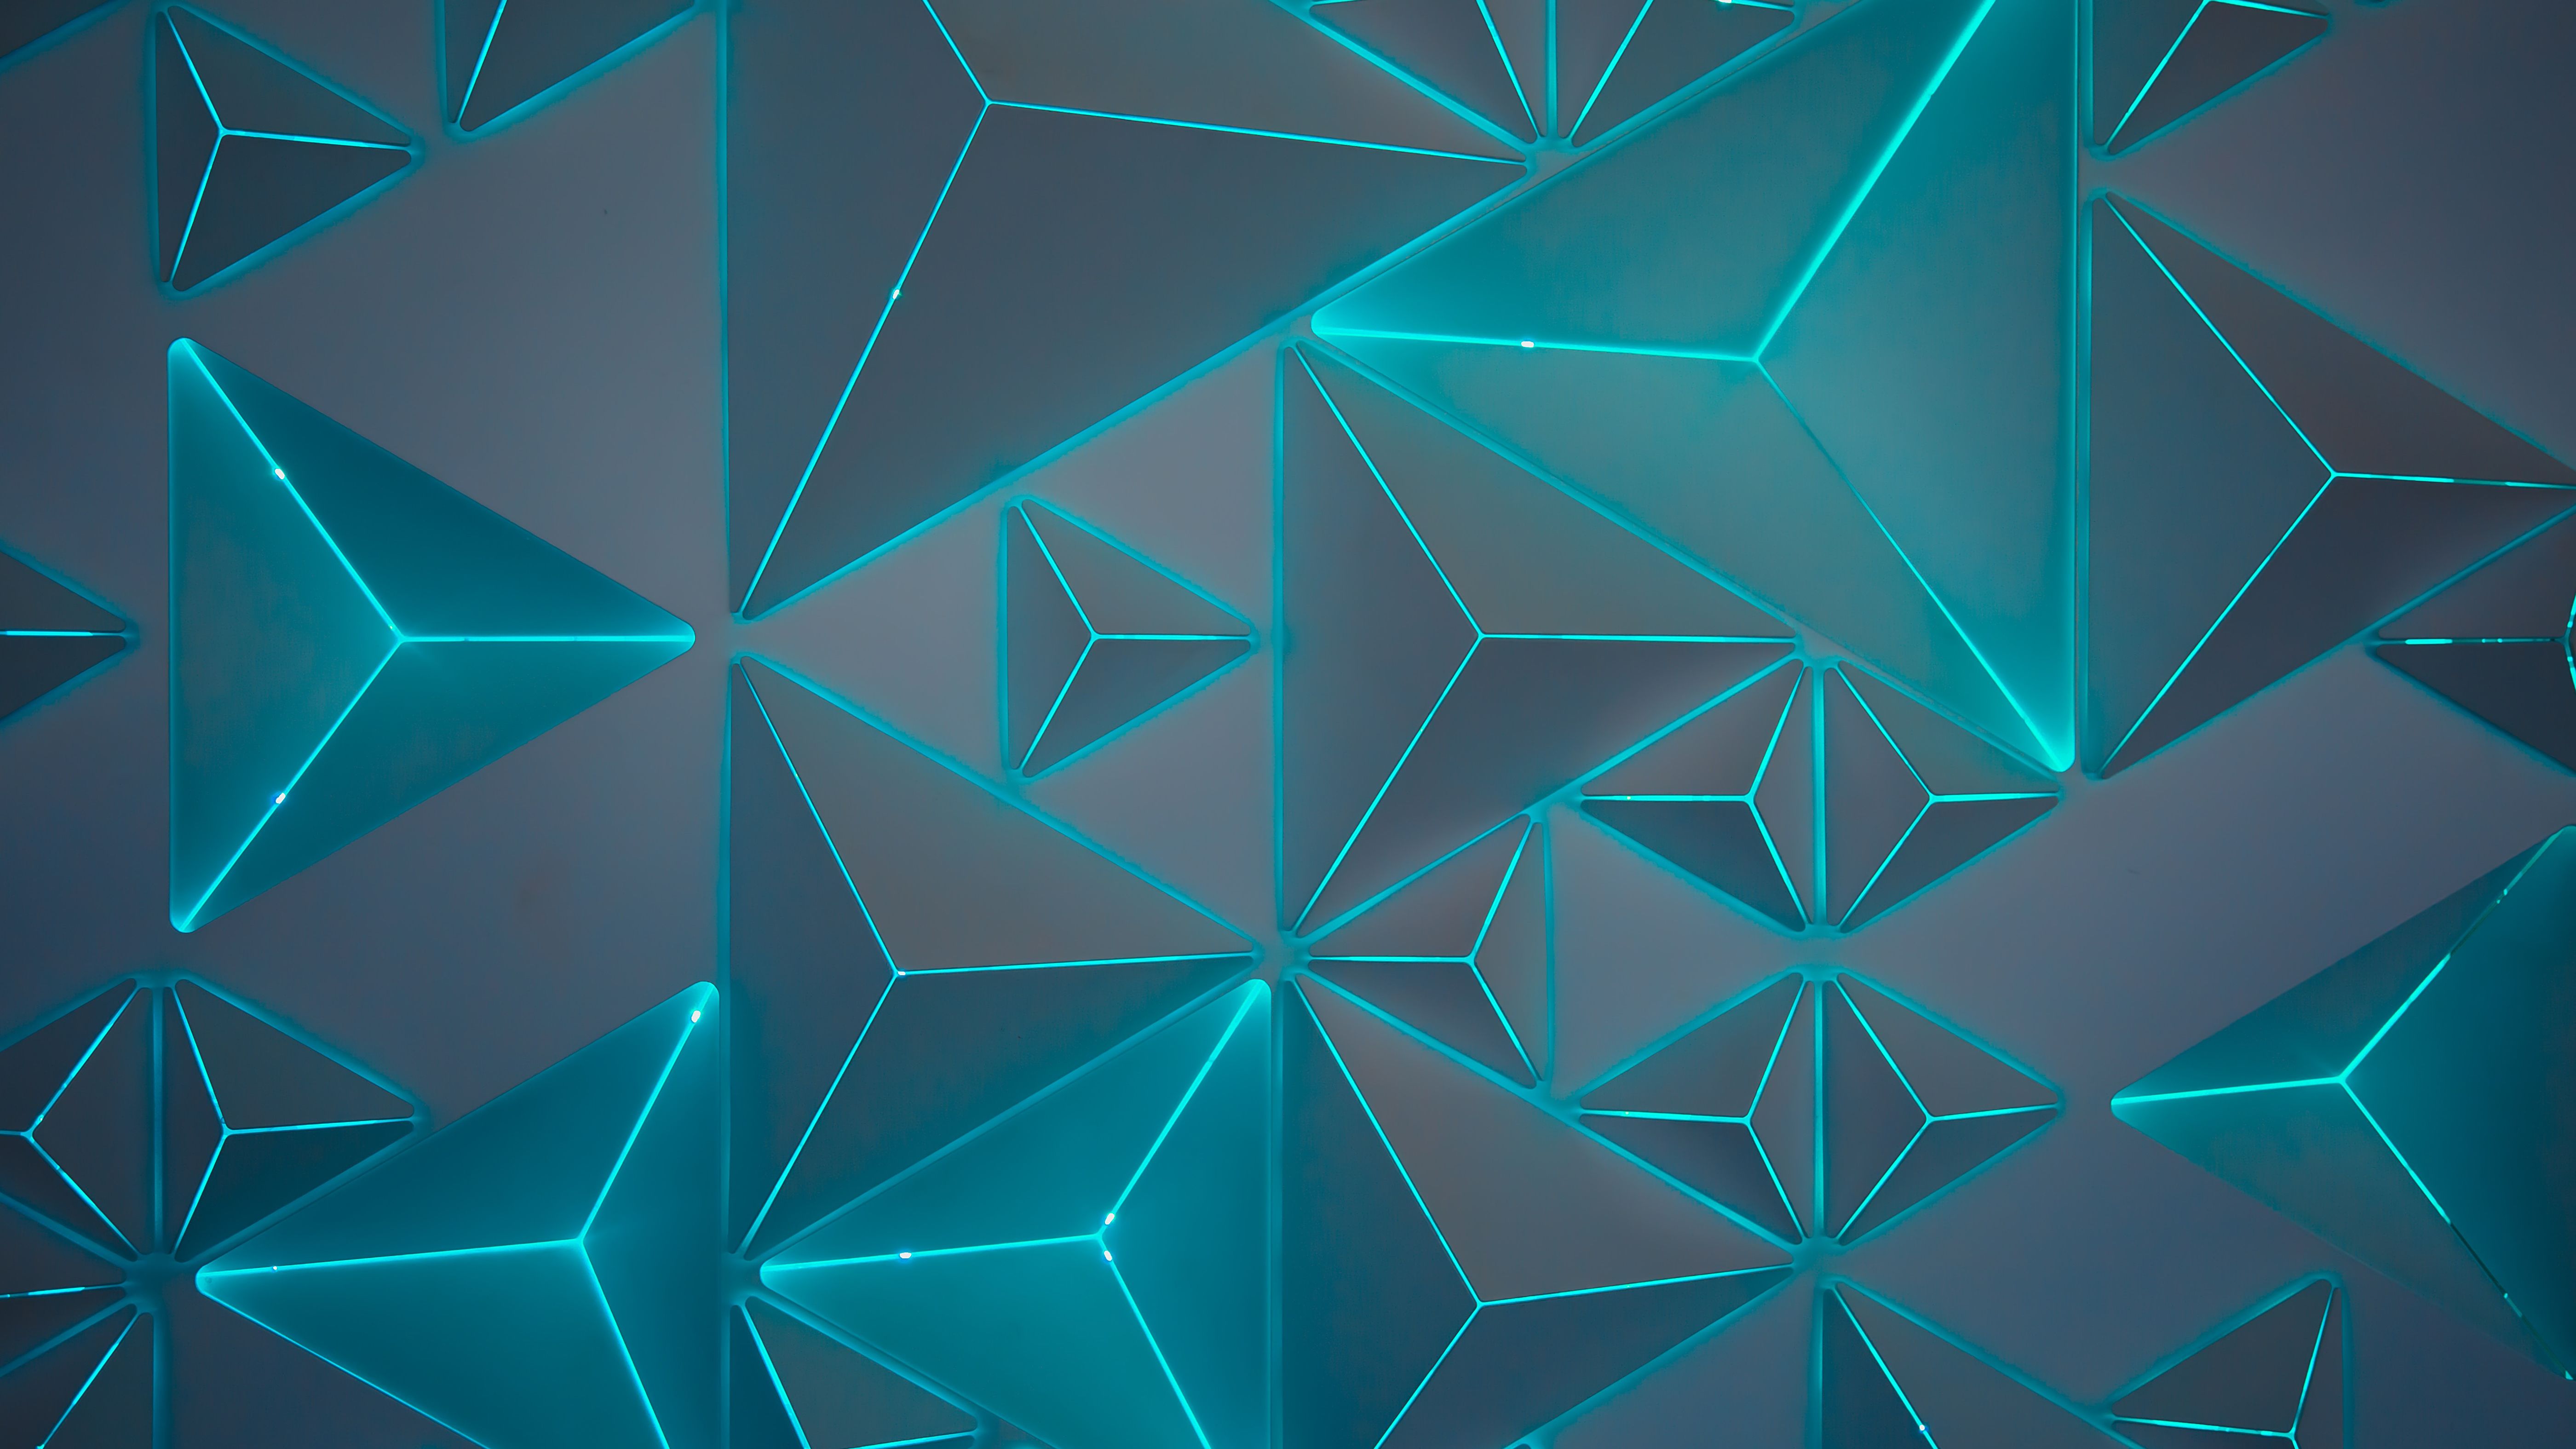 121086 Shapes, Triangles, 4K, Geometric - Rare Gallery HD Wallpapers